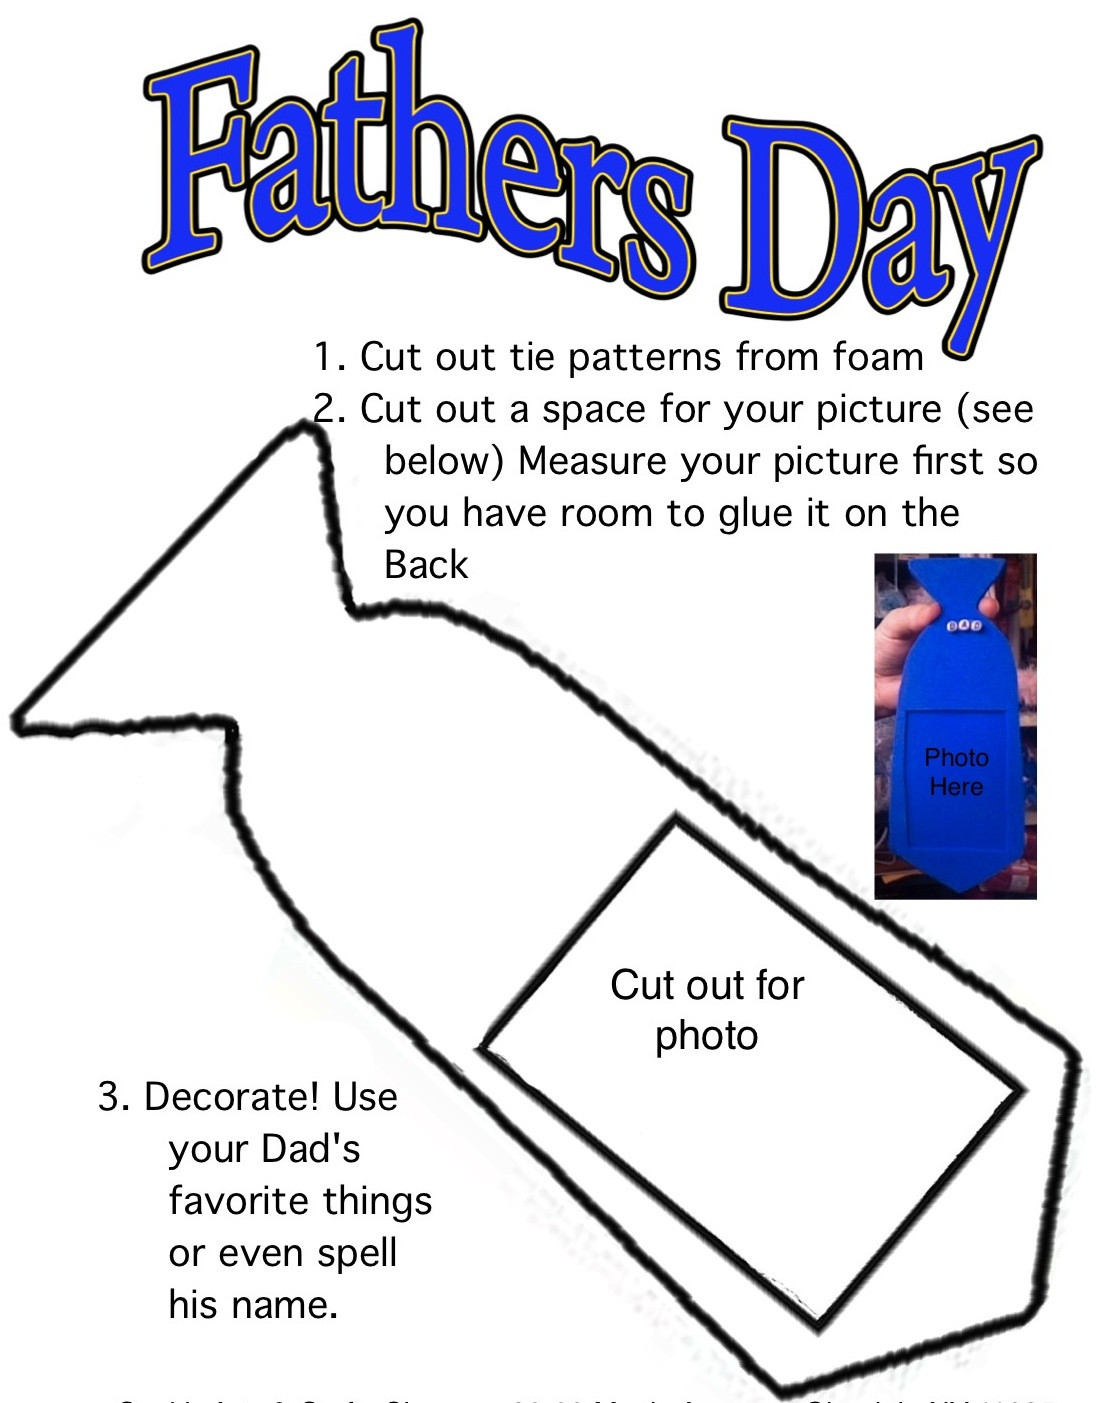 Fathers Day Arts And Crafts
 Cook s Arts & Crafts Shoppe Fathers Day Kids Craft